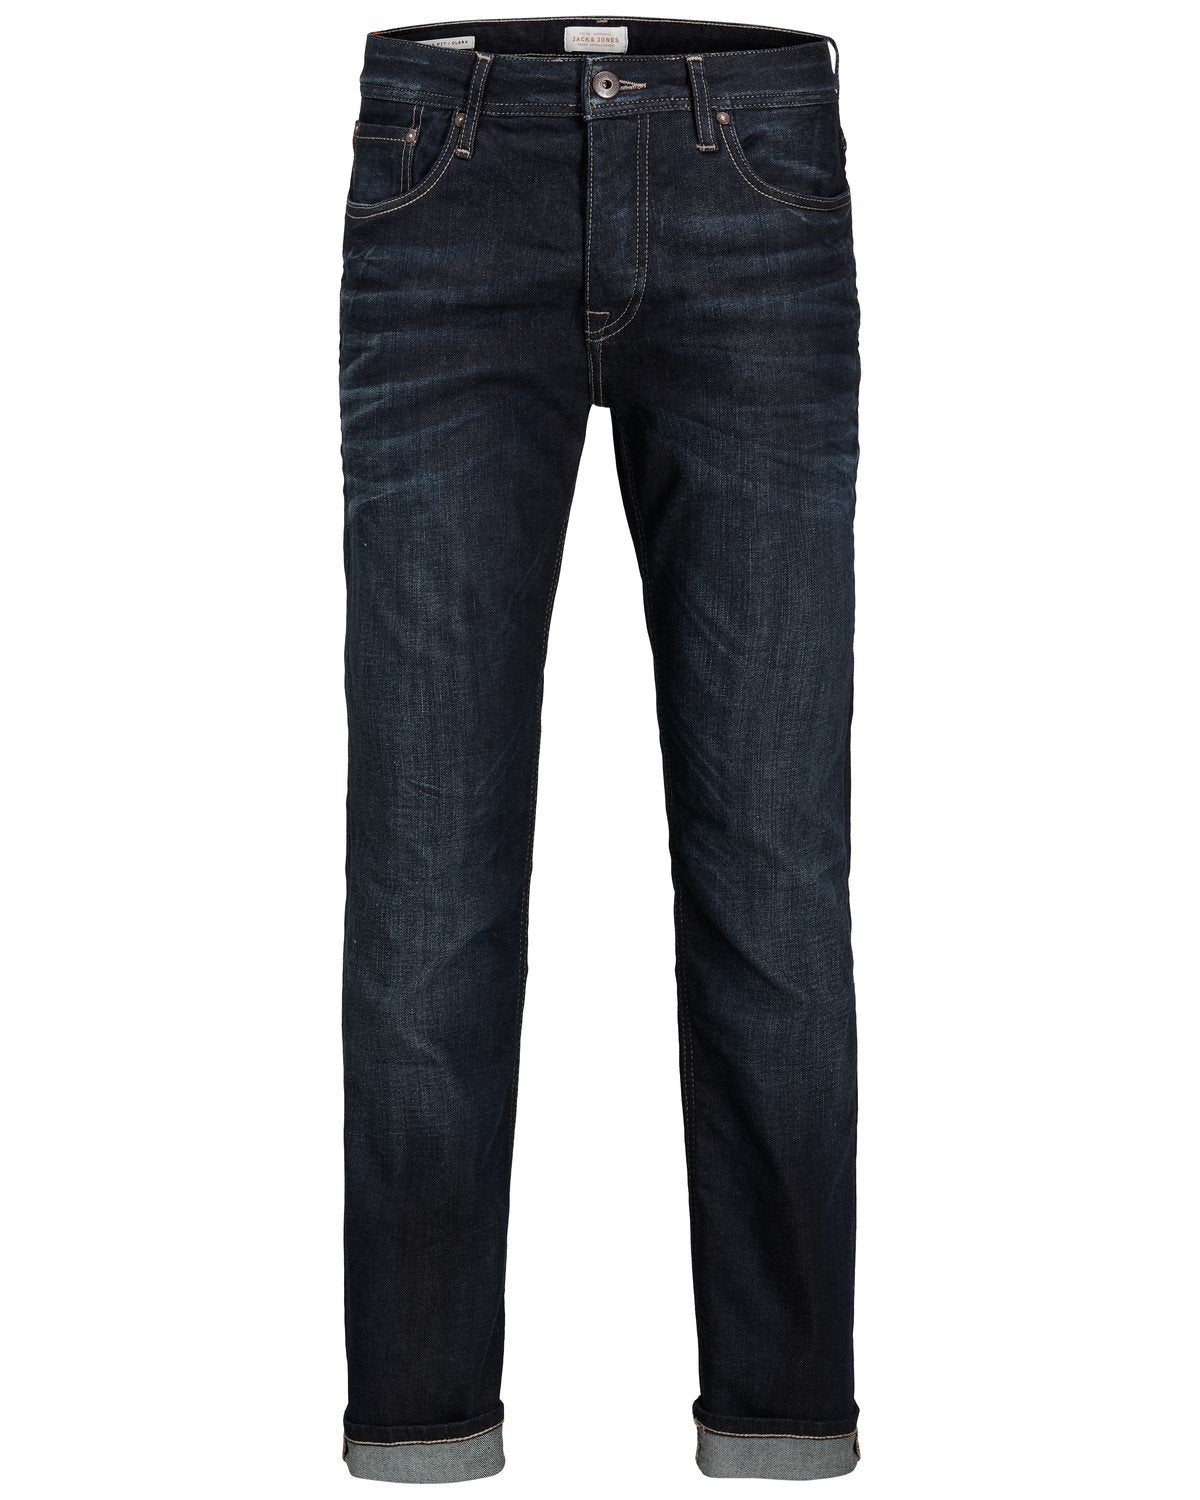 Clark 318 Straight Fit Jeans - Spirit Clothing